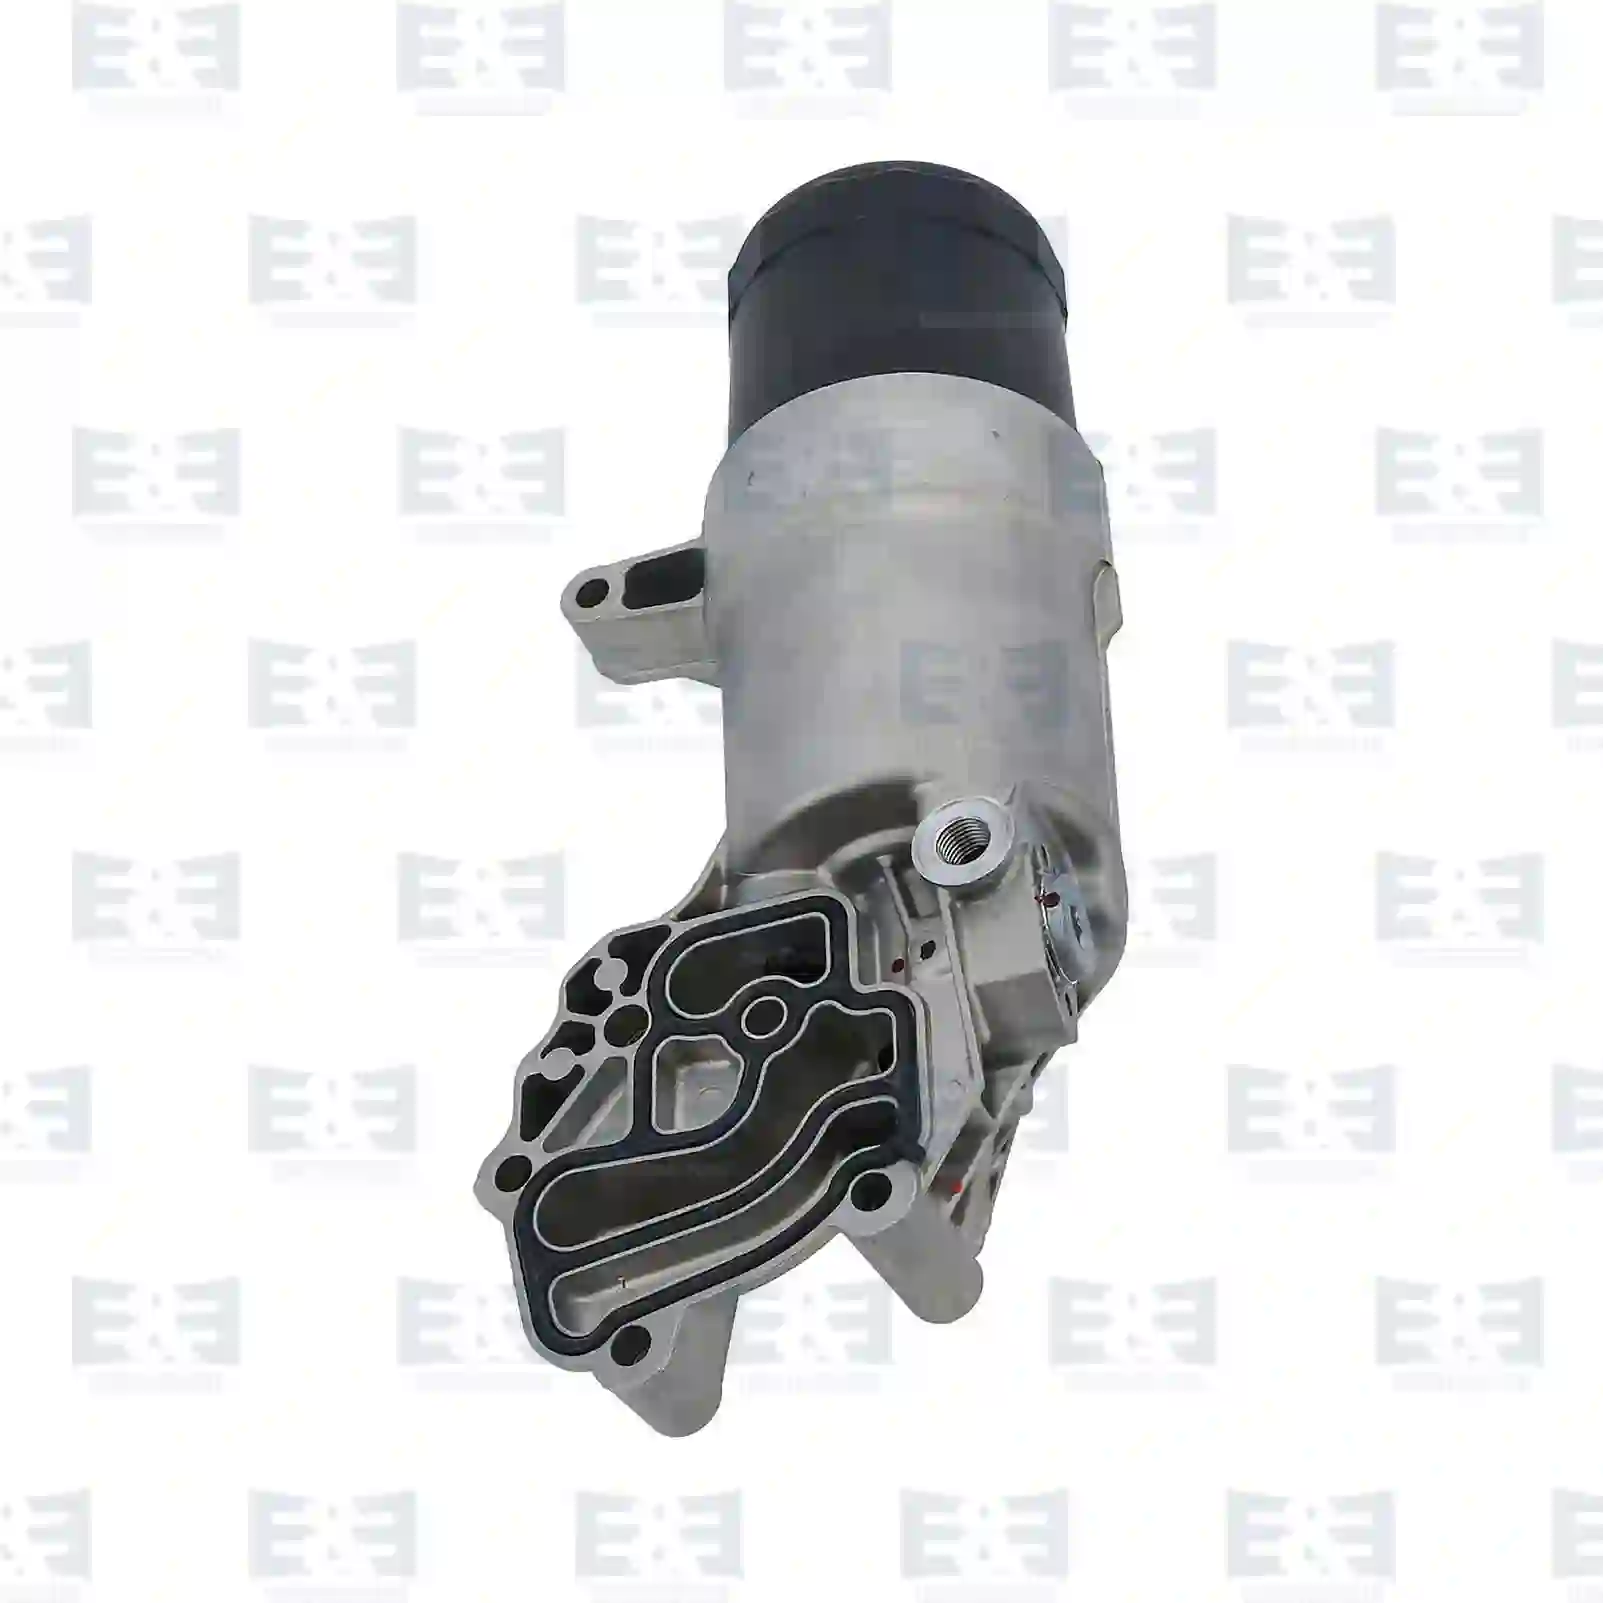  Oil filter housing, complete, with filter || E&E Truck Spare Parts | Truck Spare Parts, Auotomotive Spare Parts